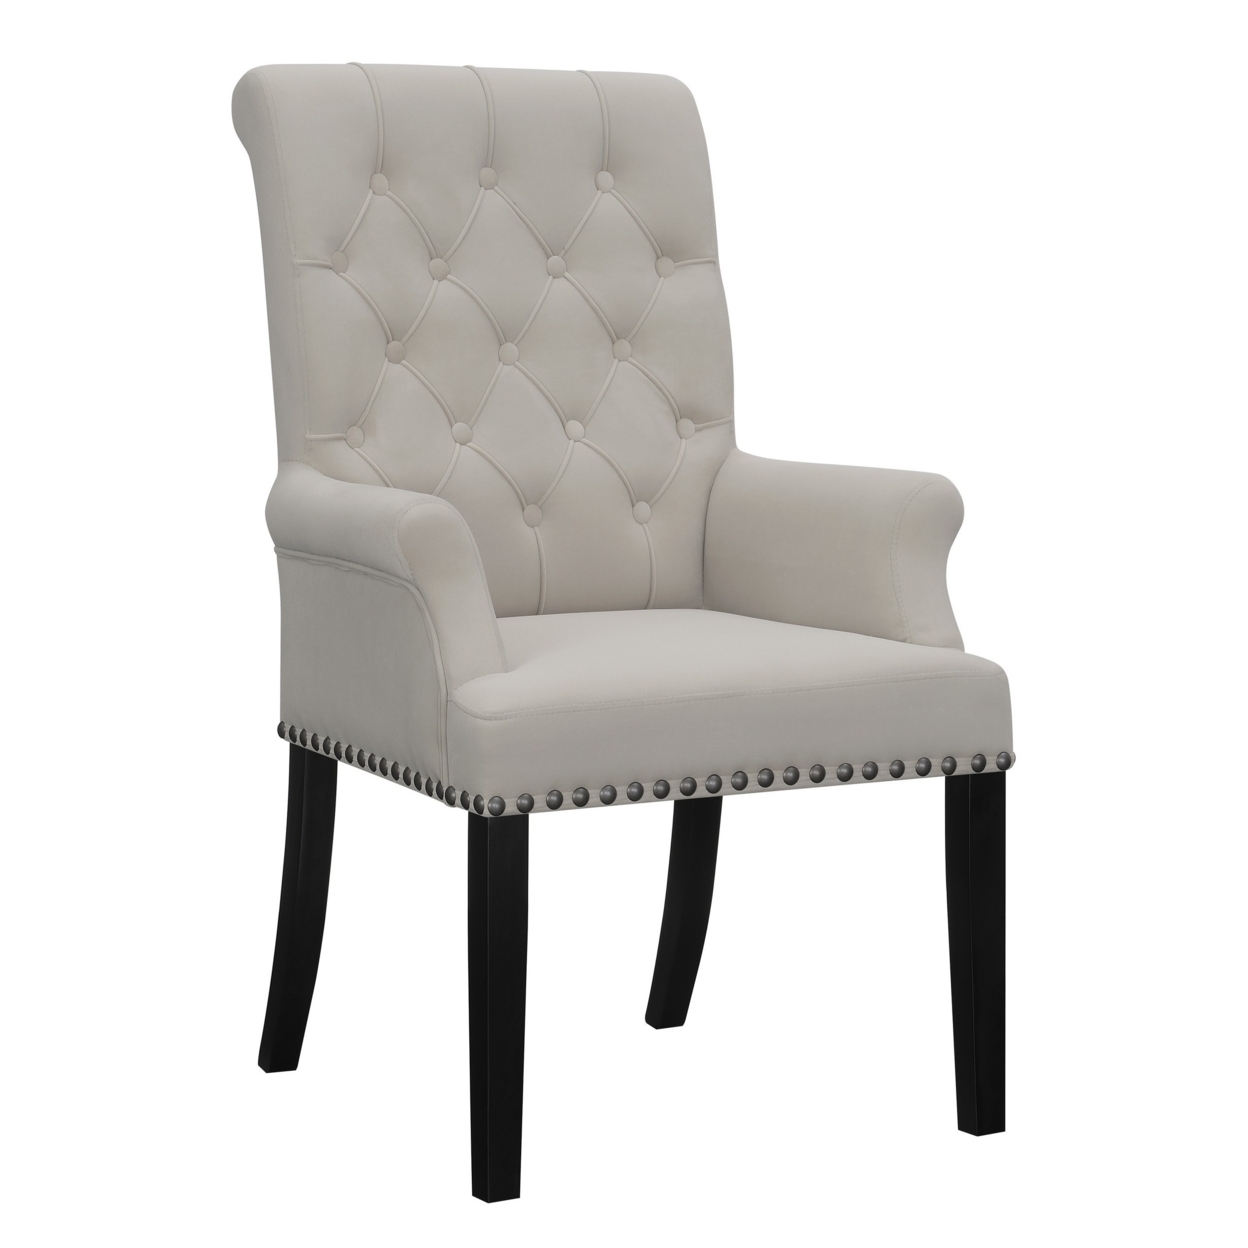 Ali 27 Inch Accent Armchair, Light Gray Fabric Button Tufted Rolled Back- Saltoro Sherpi